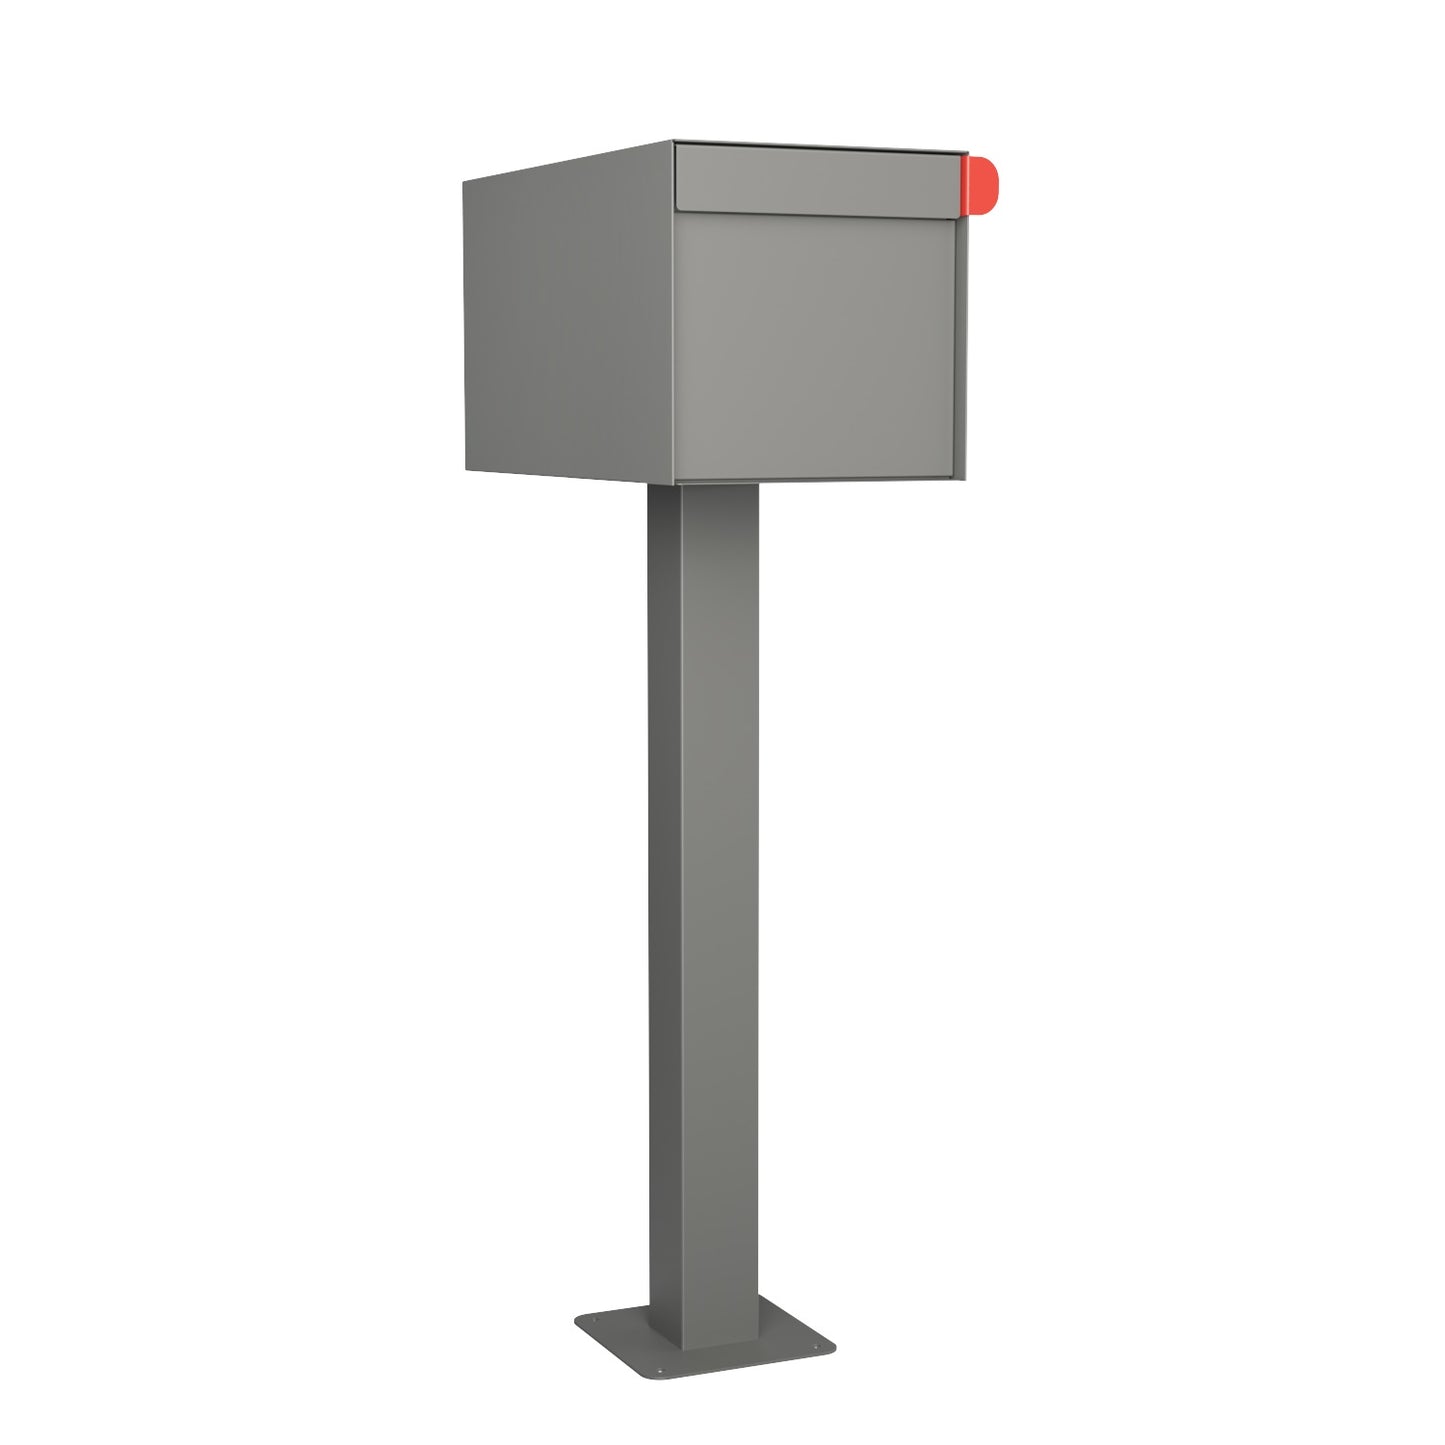 TOWN SQUARE Mailbox by Bravios - Large capacity mailbox with post - Gray